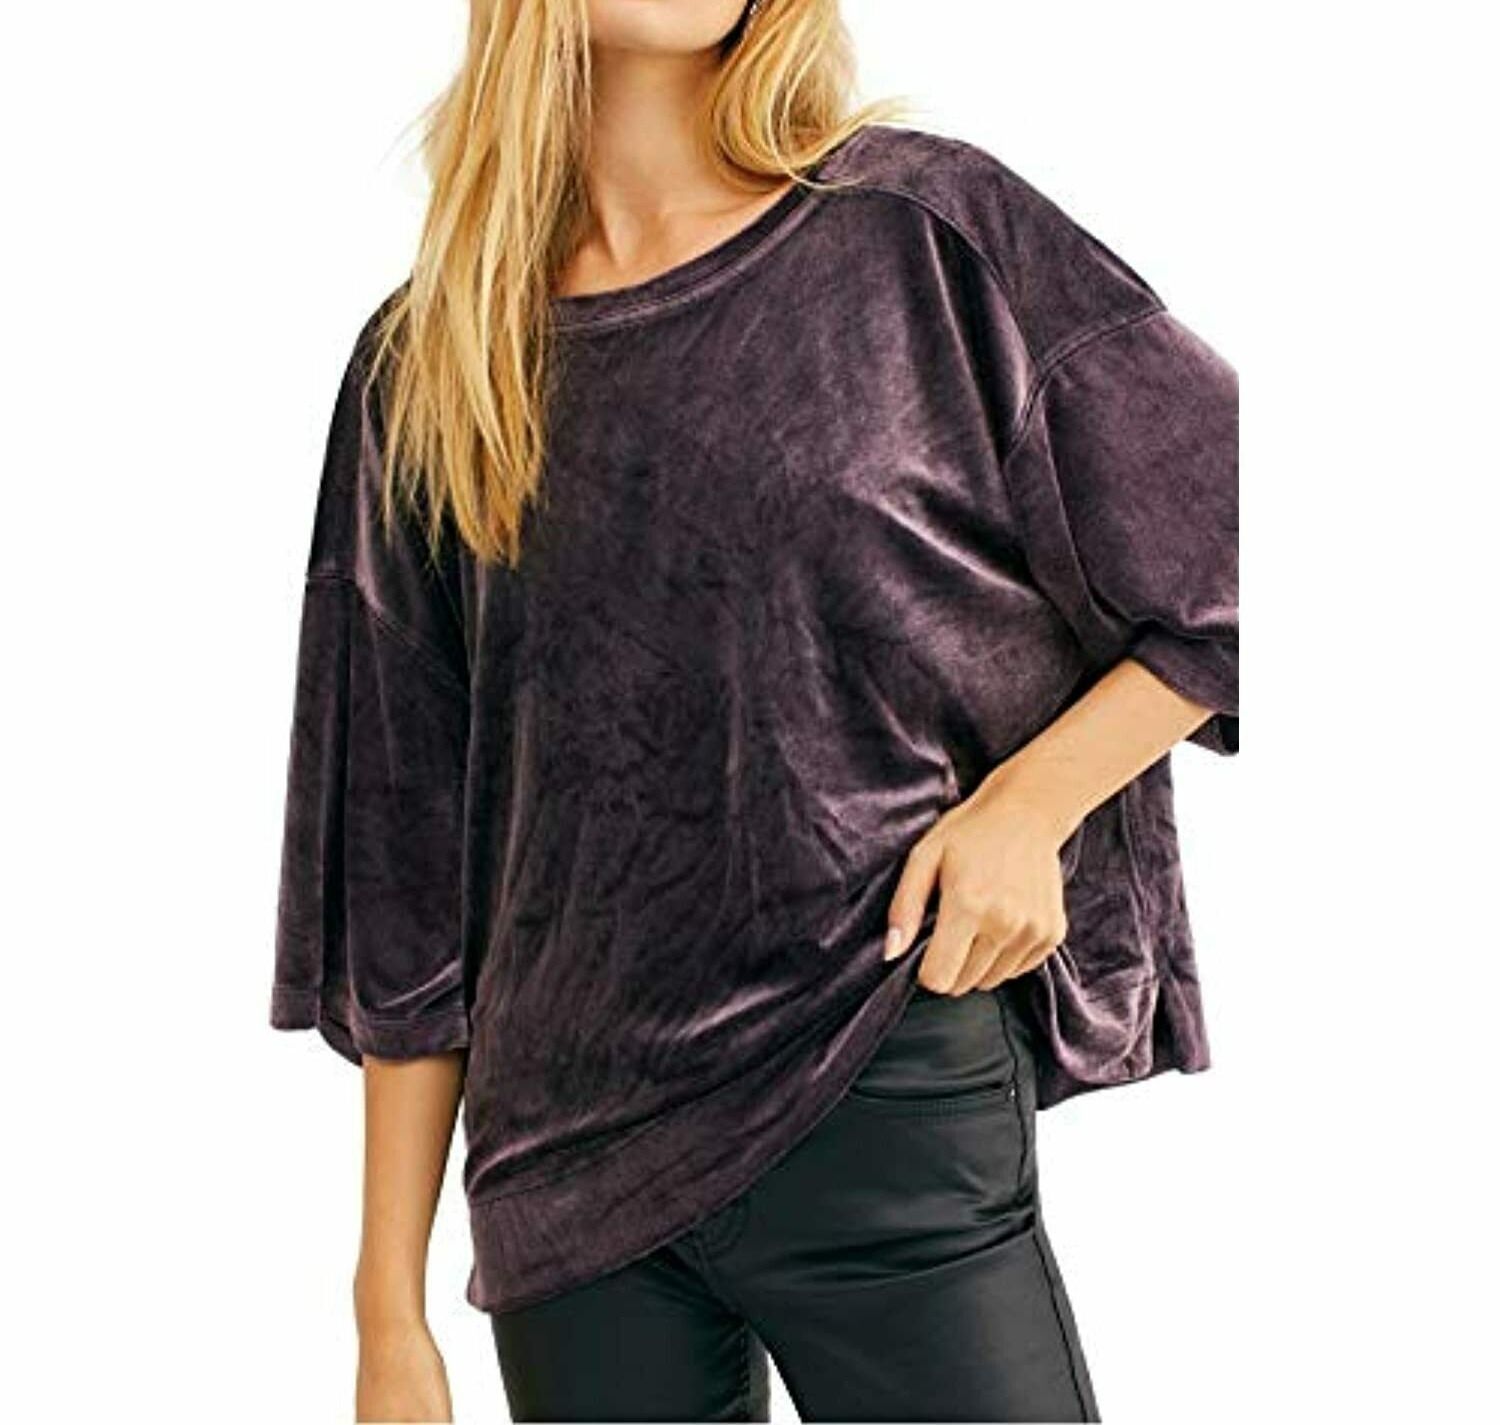 Color: Purples Size Type: Regular Size (Women's): L Sleeve Length: Short Sleeve Type: T-Shirt Style: Knit Top Neckline: Round Neck Pattern: Solid Theme: Classic Material: Polyester